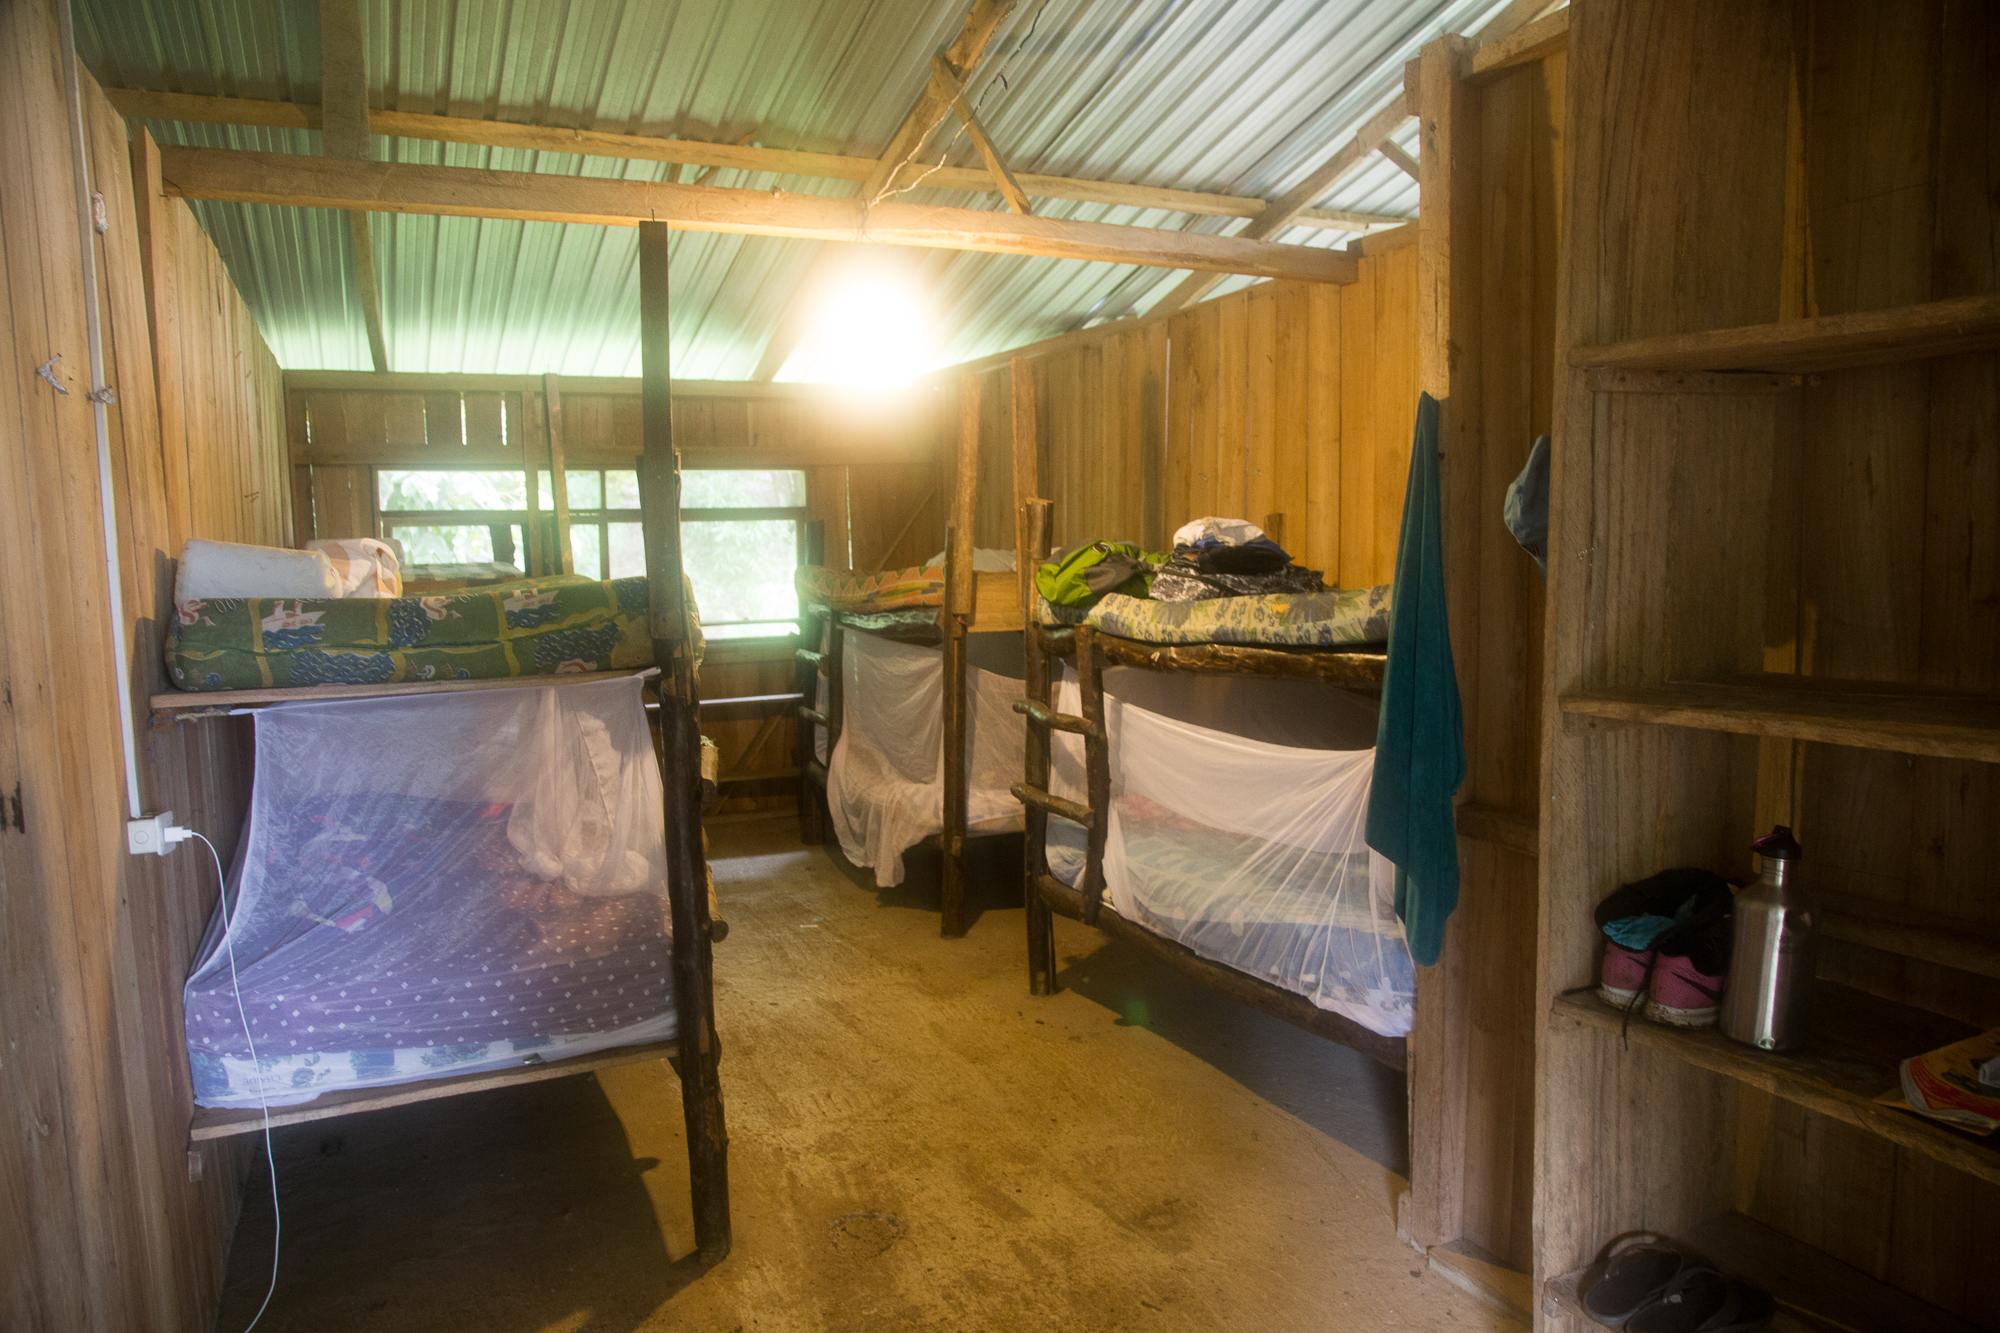  Our bedtime oases. Everyone had a full bunk: luggage stayed on the top bunk (so critters wouldn't get in) and mosquito net caves were constructed on the bottom bunks (so critters wouldn't get in). 